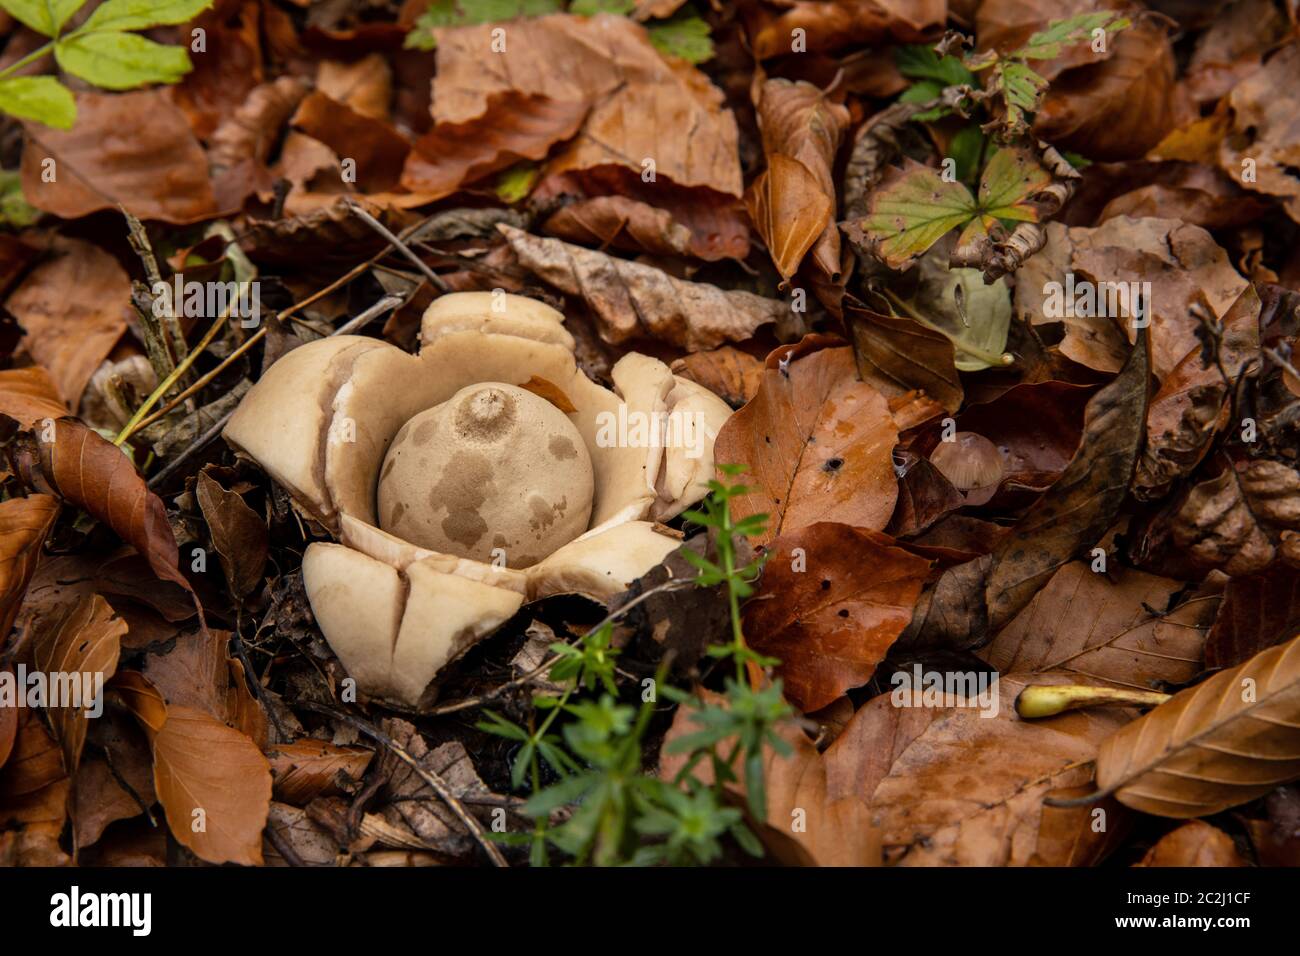 a poisonous mushroom in the forest Stock Photo